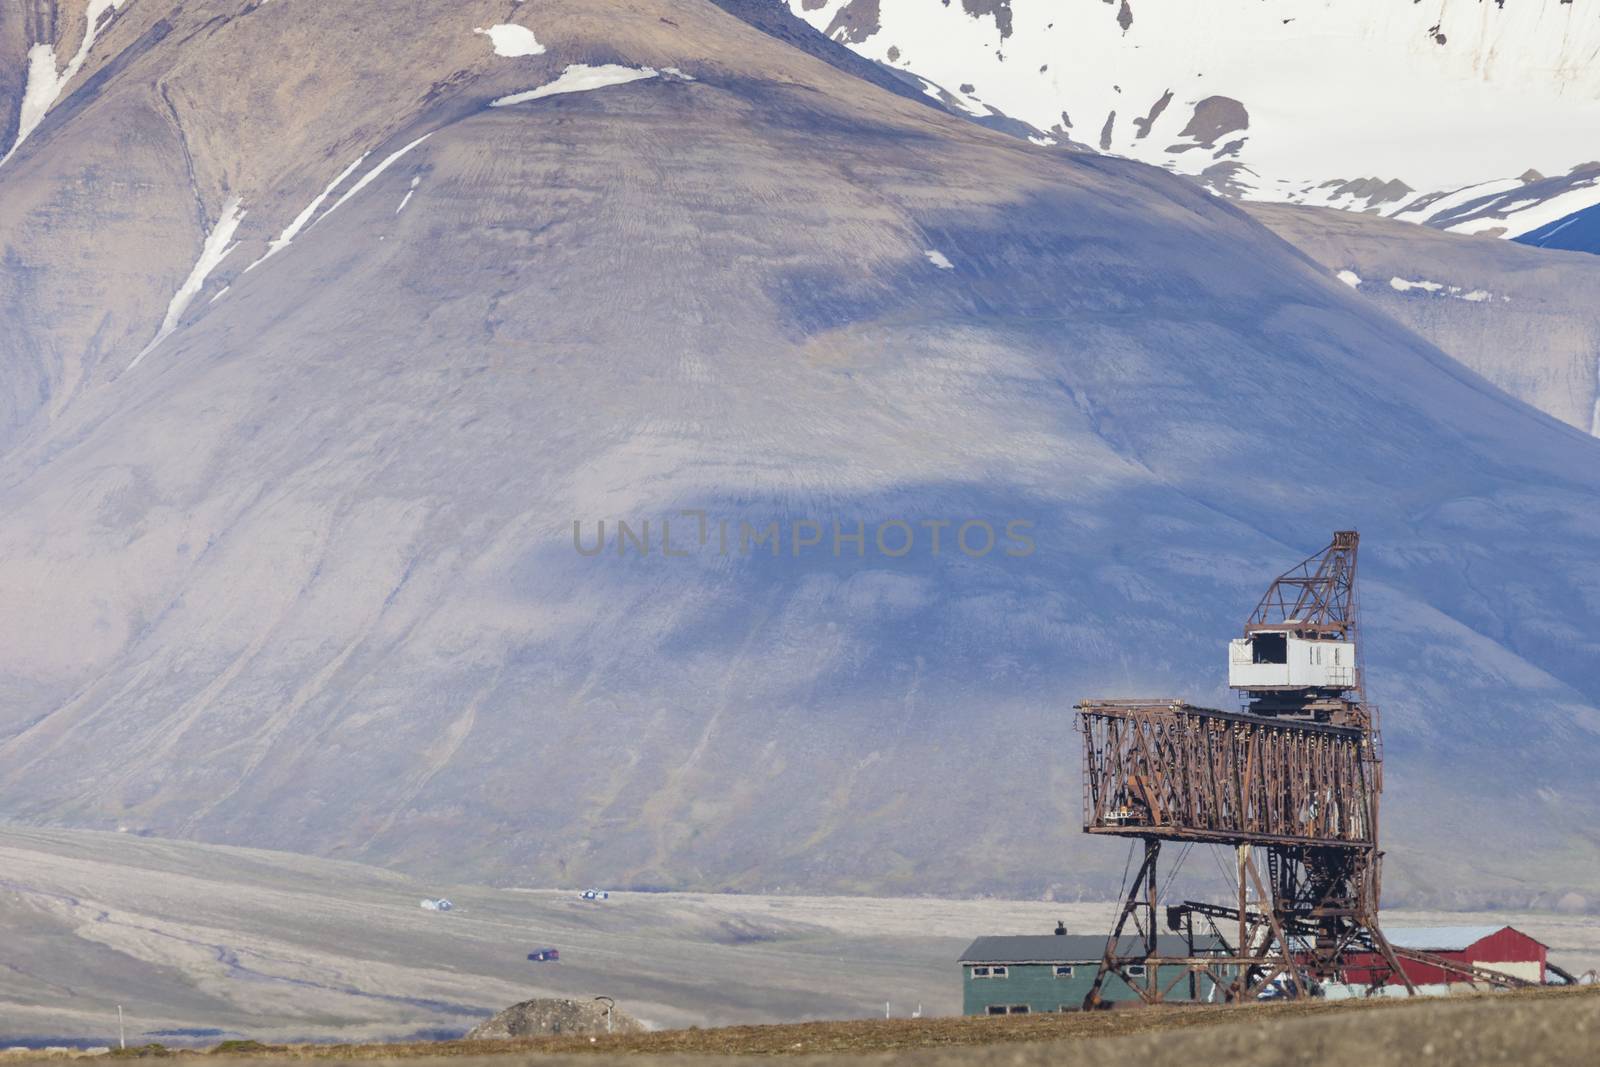 Abandoned wooden coal mine transportation station in Svalbard, Norway

